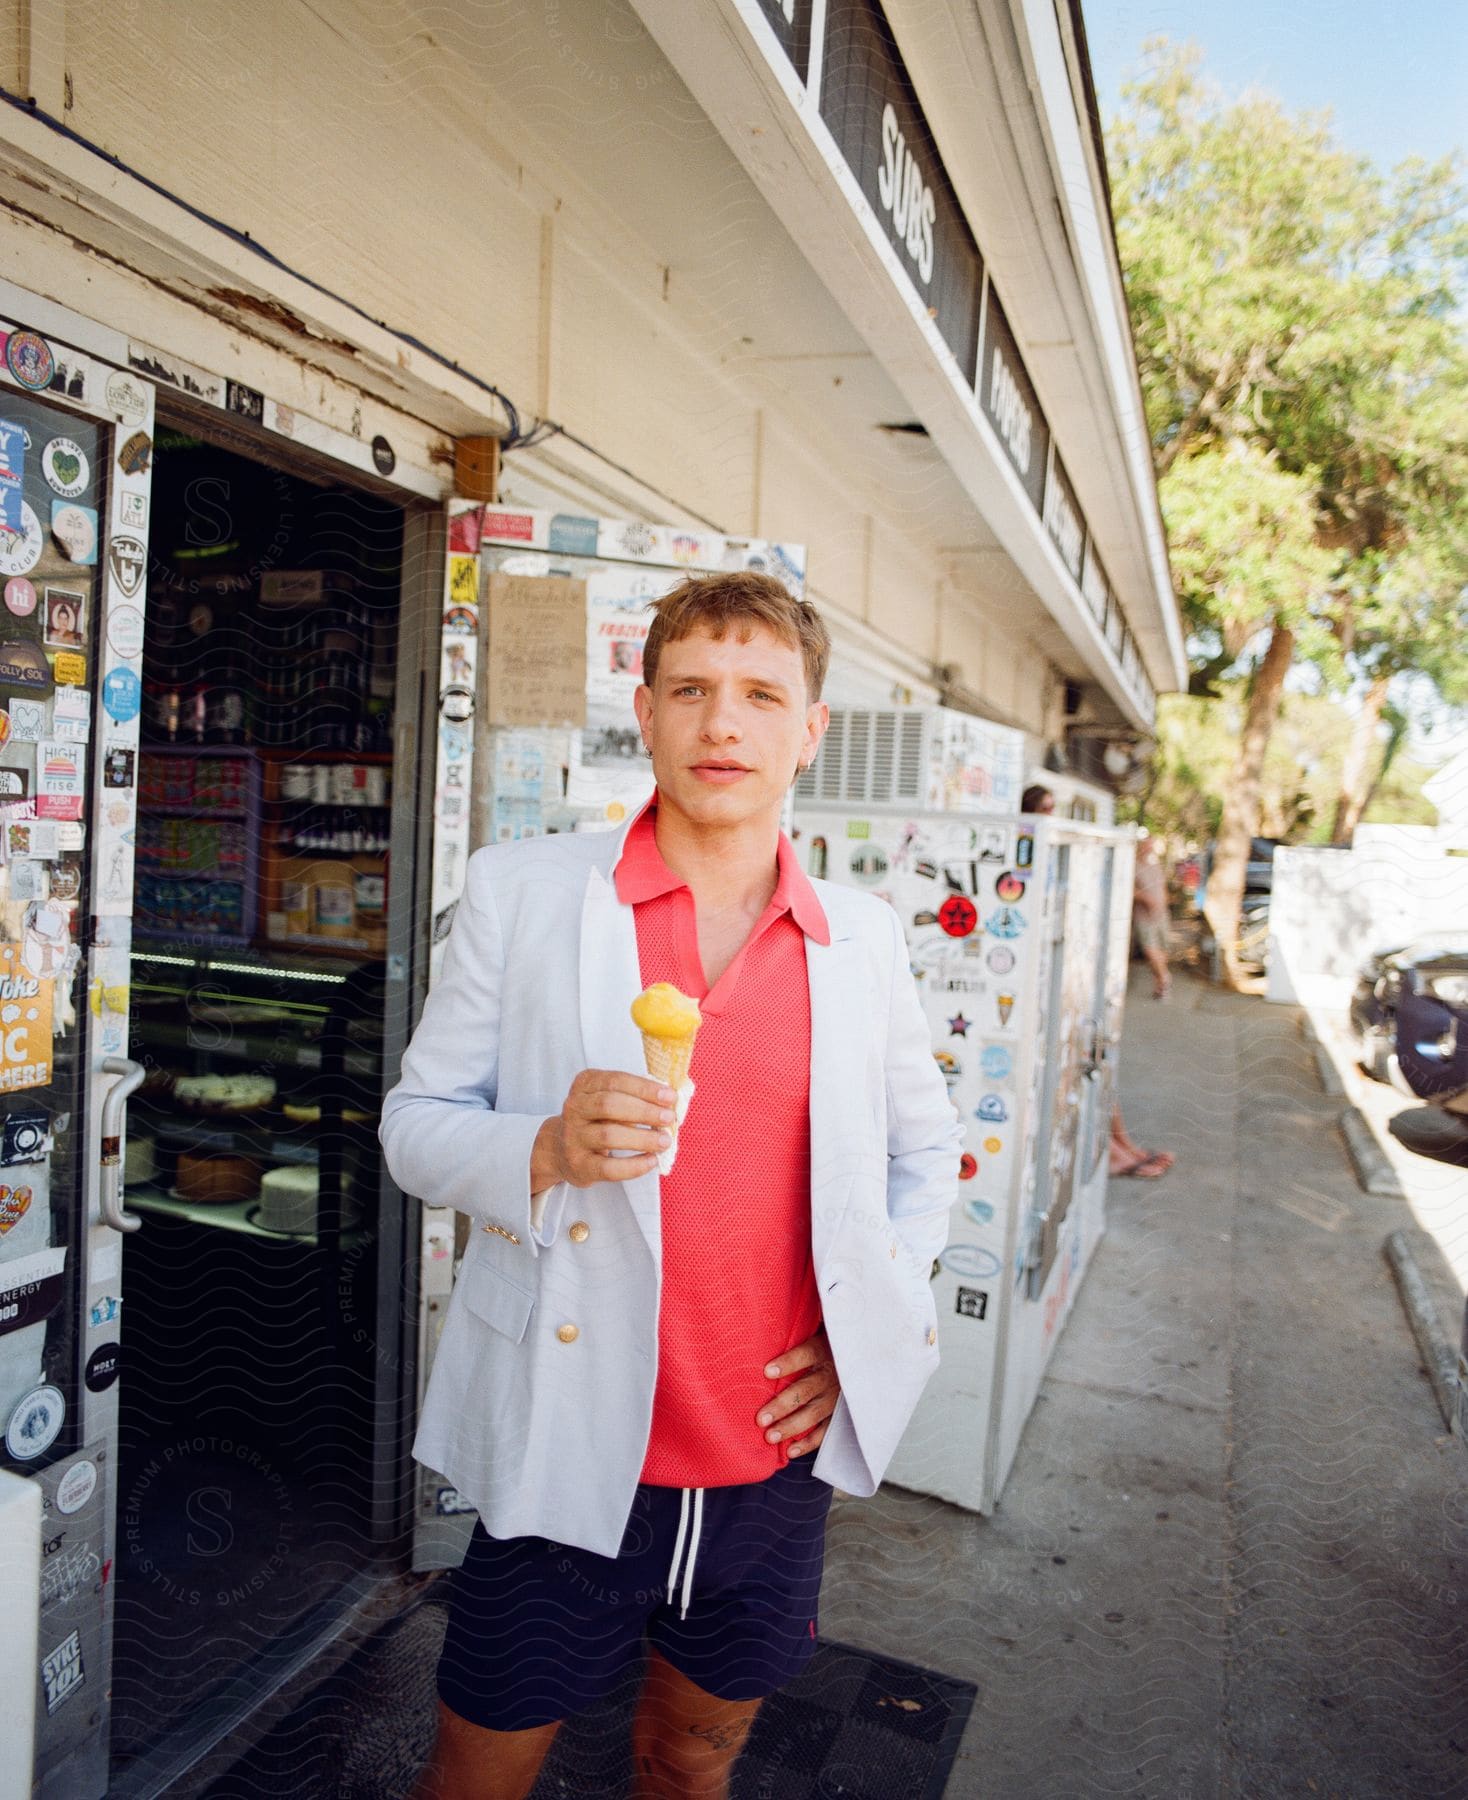 Man with his hand on his waist wearing a white blazer and shorts while holding an ice cream next to a commercial establishment